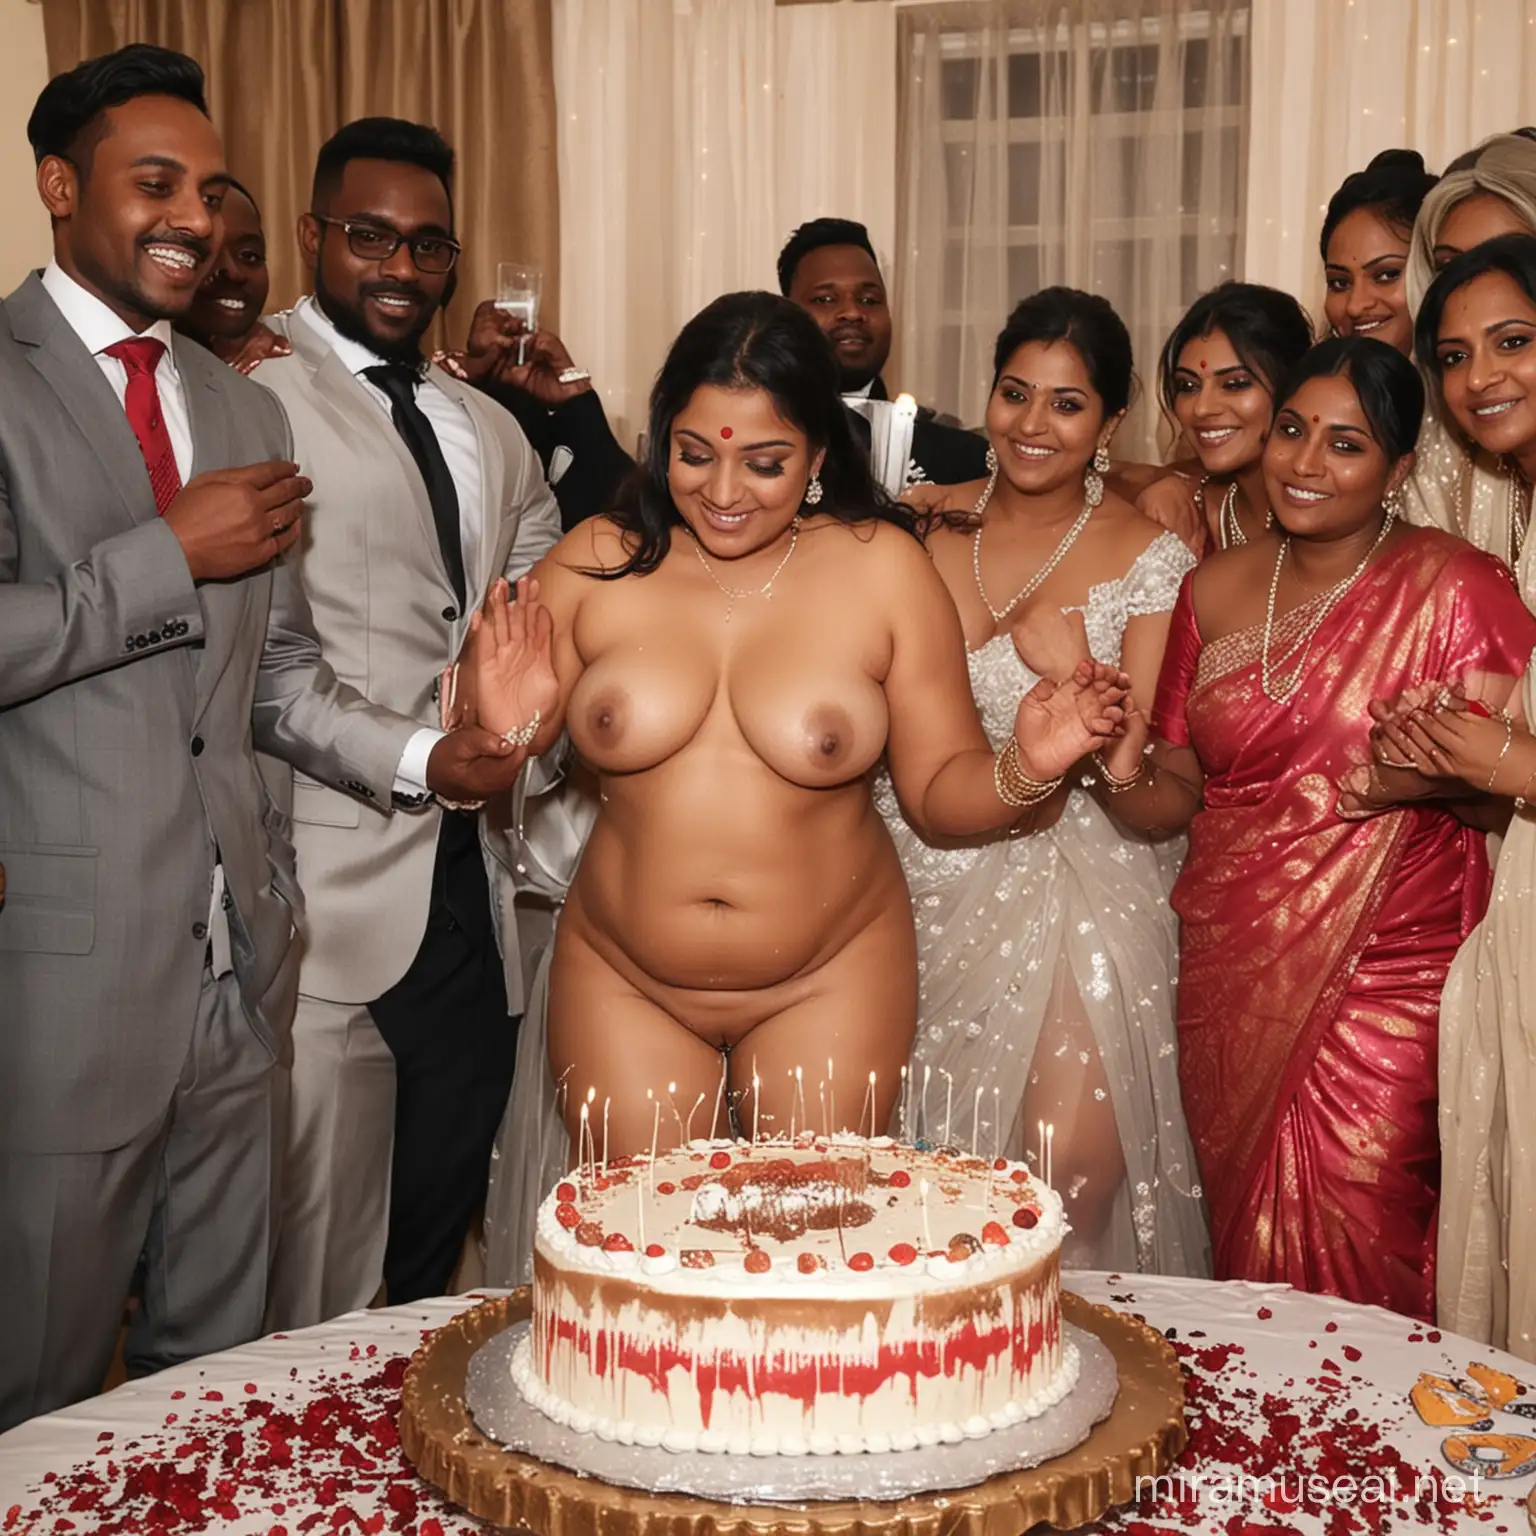 Fully Nude Sexy Indian BBW wife, cutting cake,6 African suited guests clapping, One guest pressing her ass. 